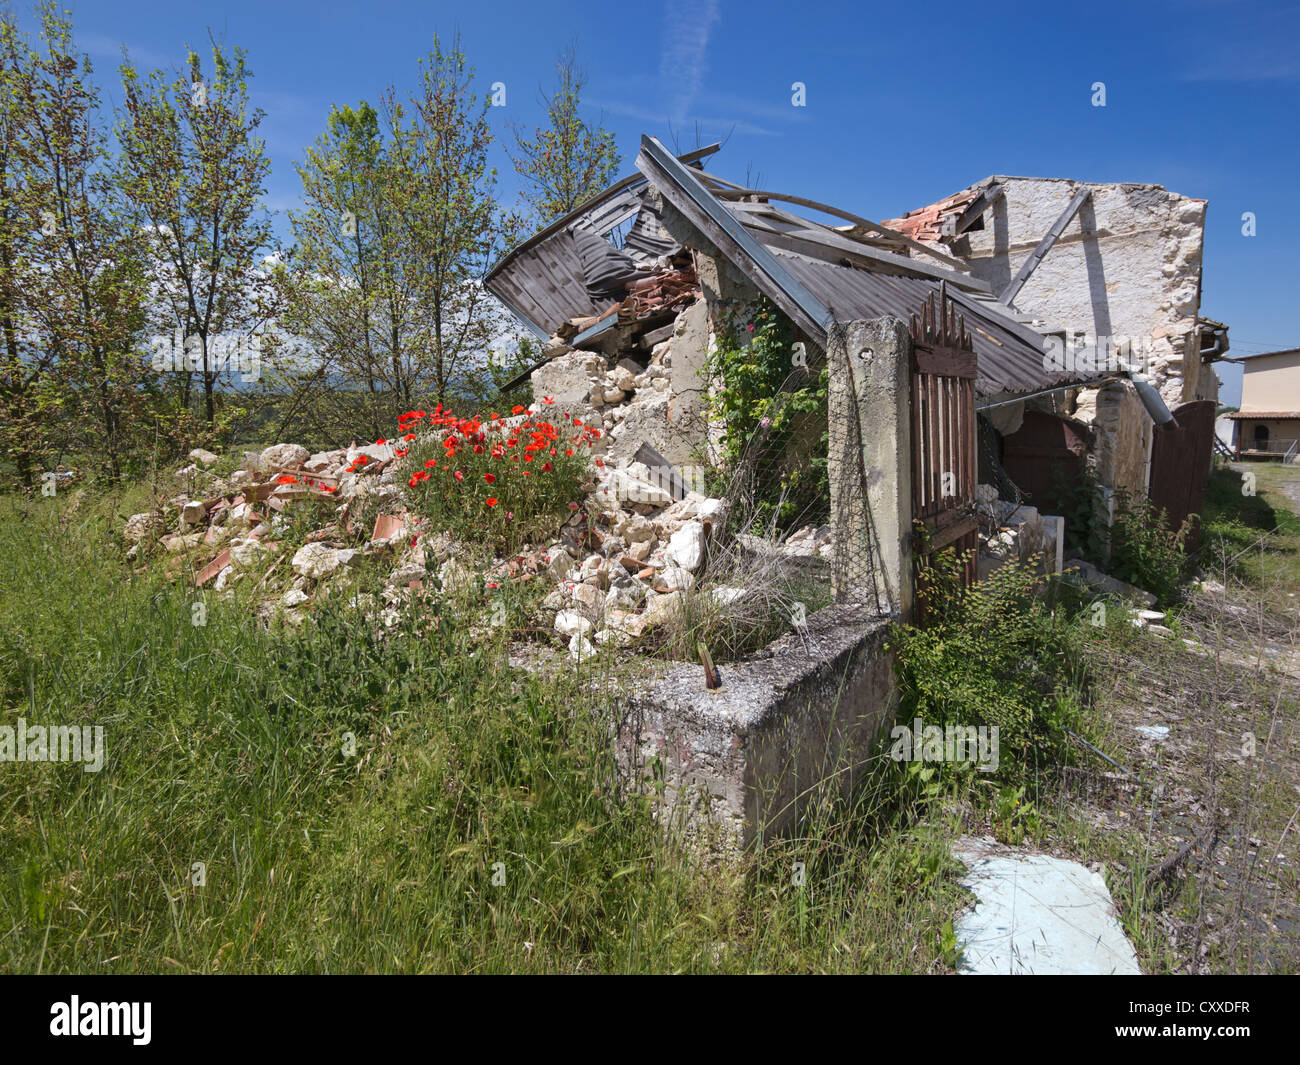 Ruined buildings destroyed by the earthquake on 6th April 2009 in Castelnuovo near L'Aquila, Abruzzo region, Italy, Europe Stock Photo